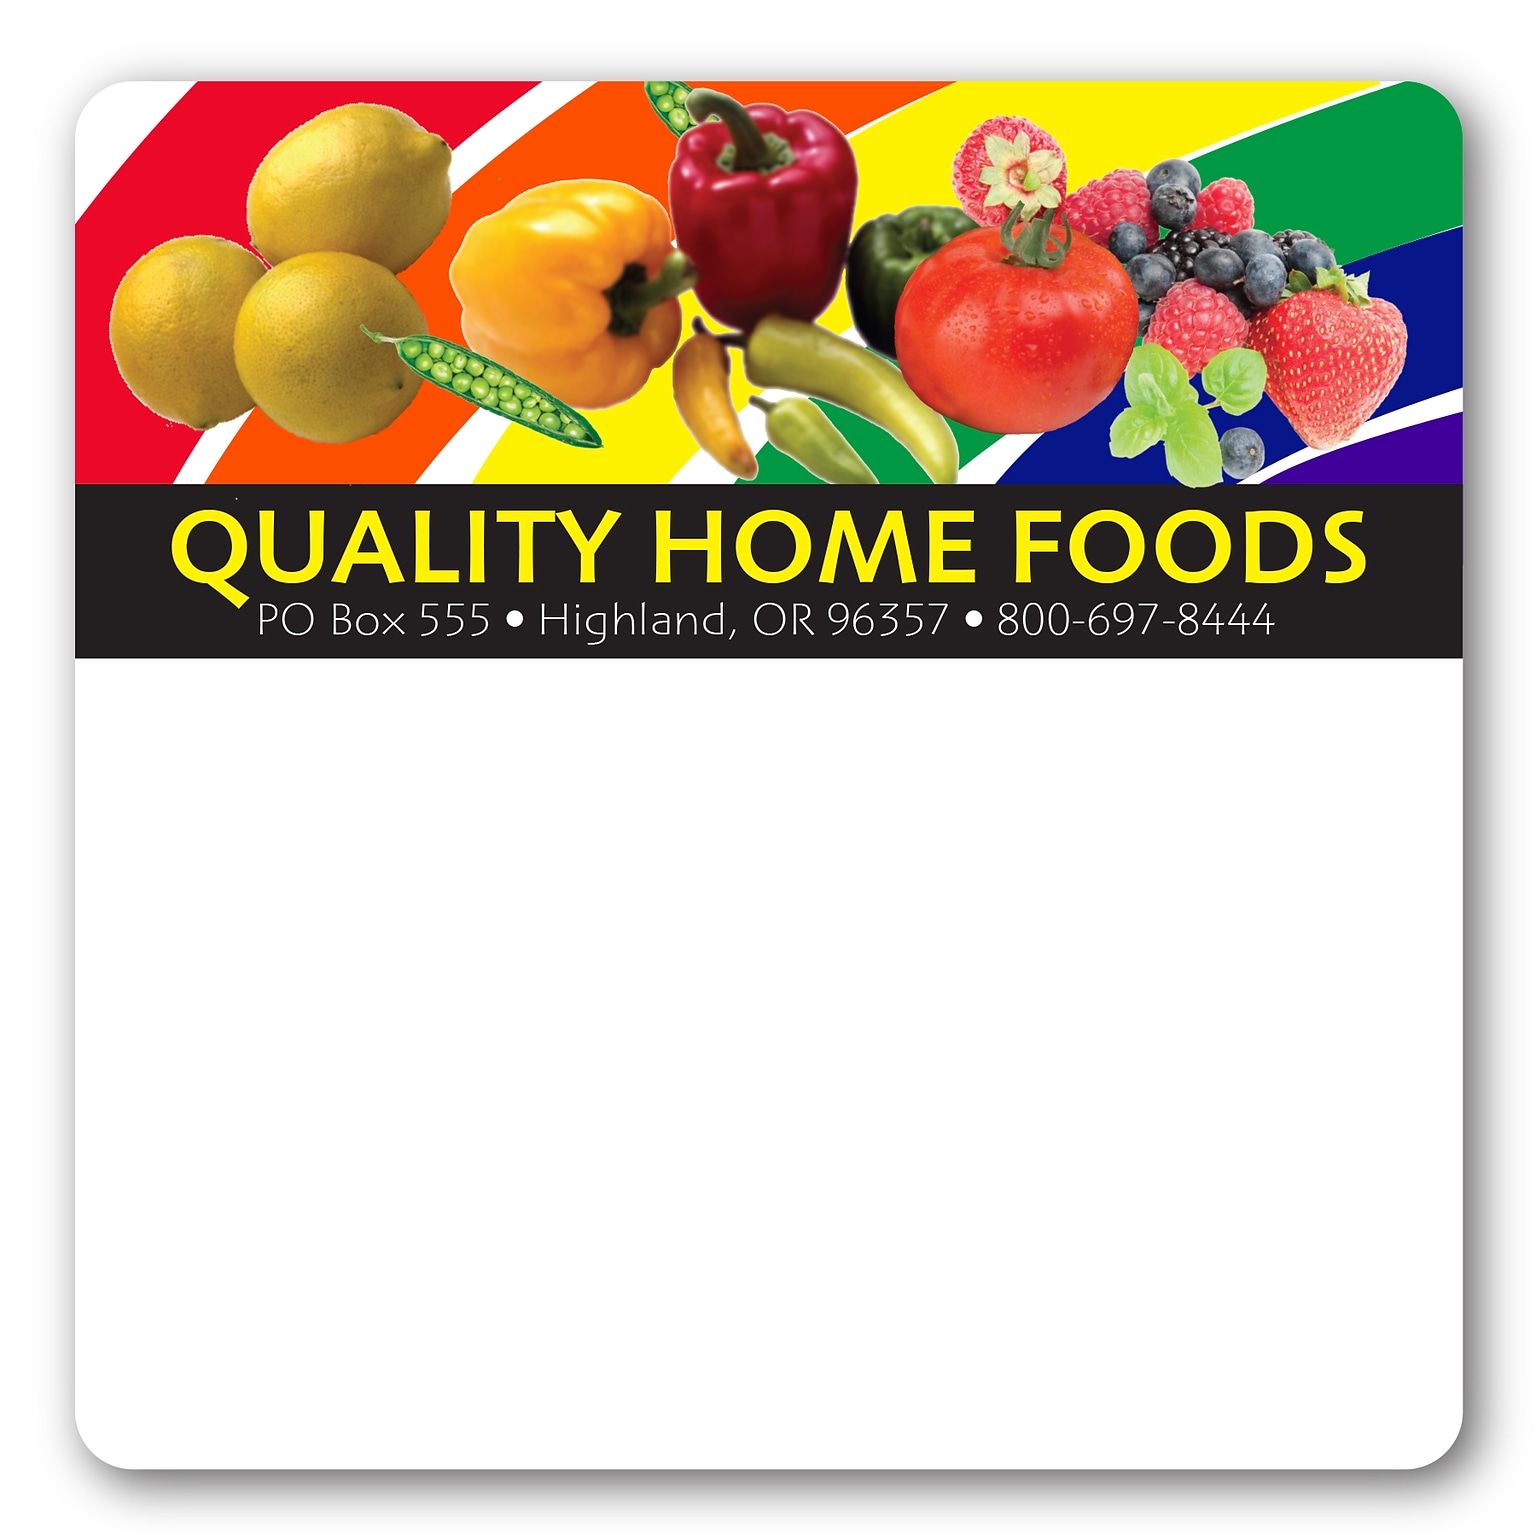 Custom Print Advertising Label, 3 x 3 Square, 1-Sided Full Color, 250 Labels/Roll